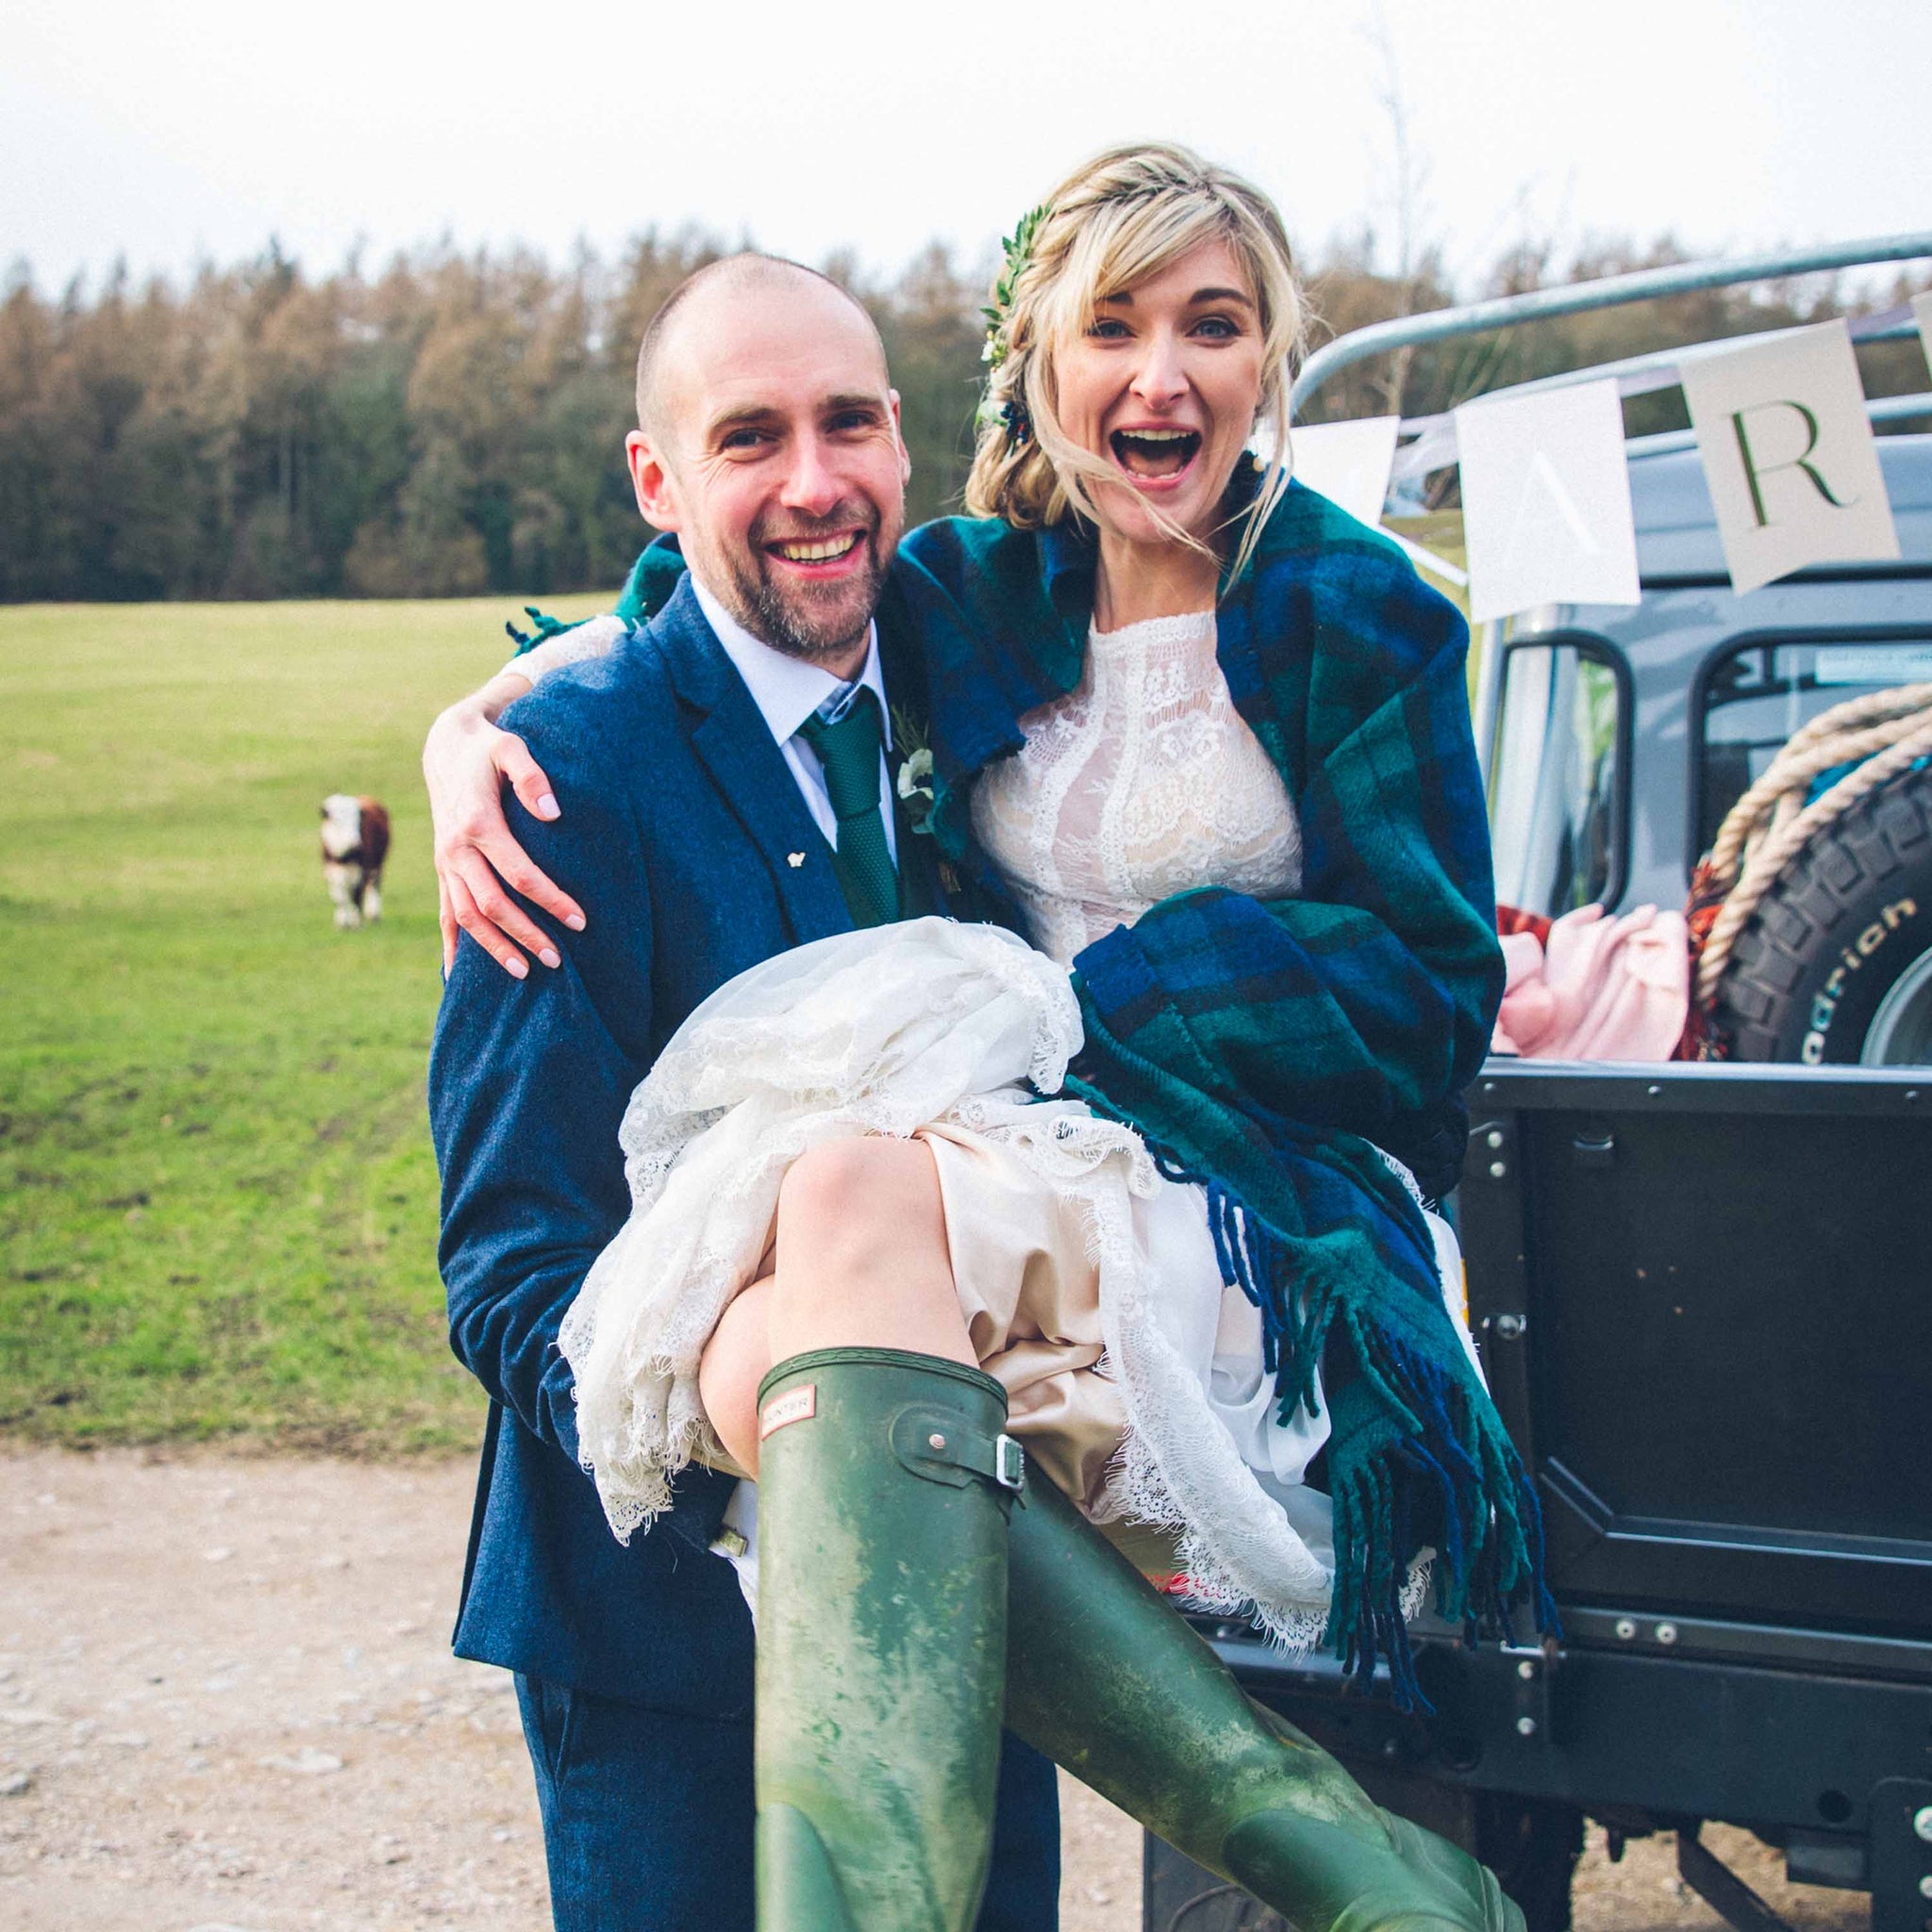 husband carrying wife. She is wearing a wedding dress and green wellington boots.